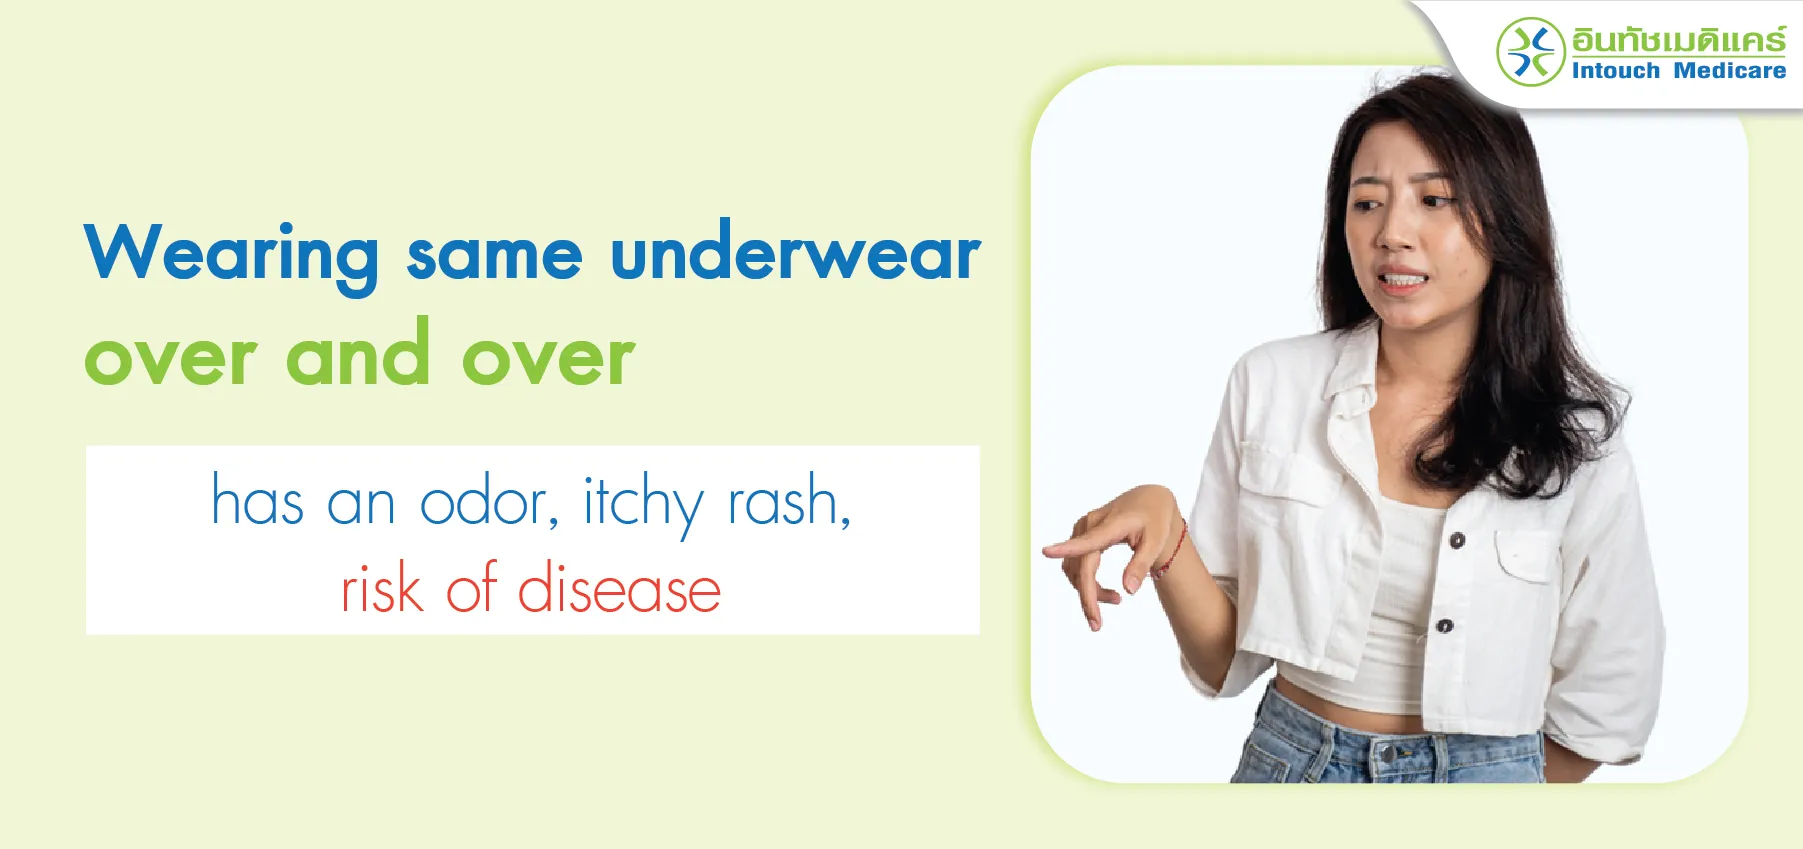 Wearing_unwashed_underwear_that_has_a_smell_rash_and_risk_of_disease